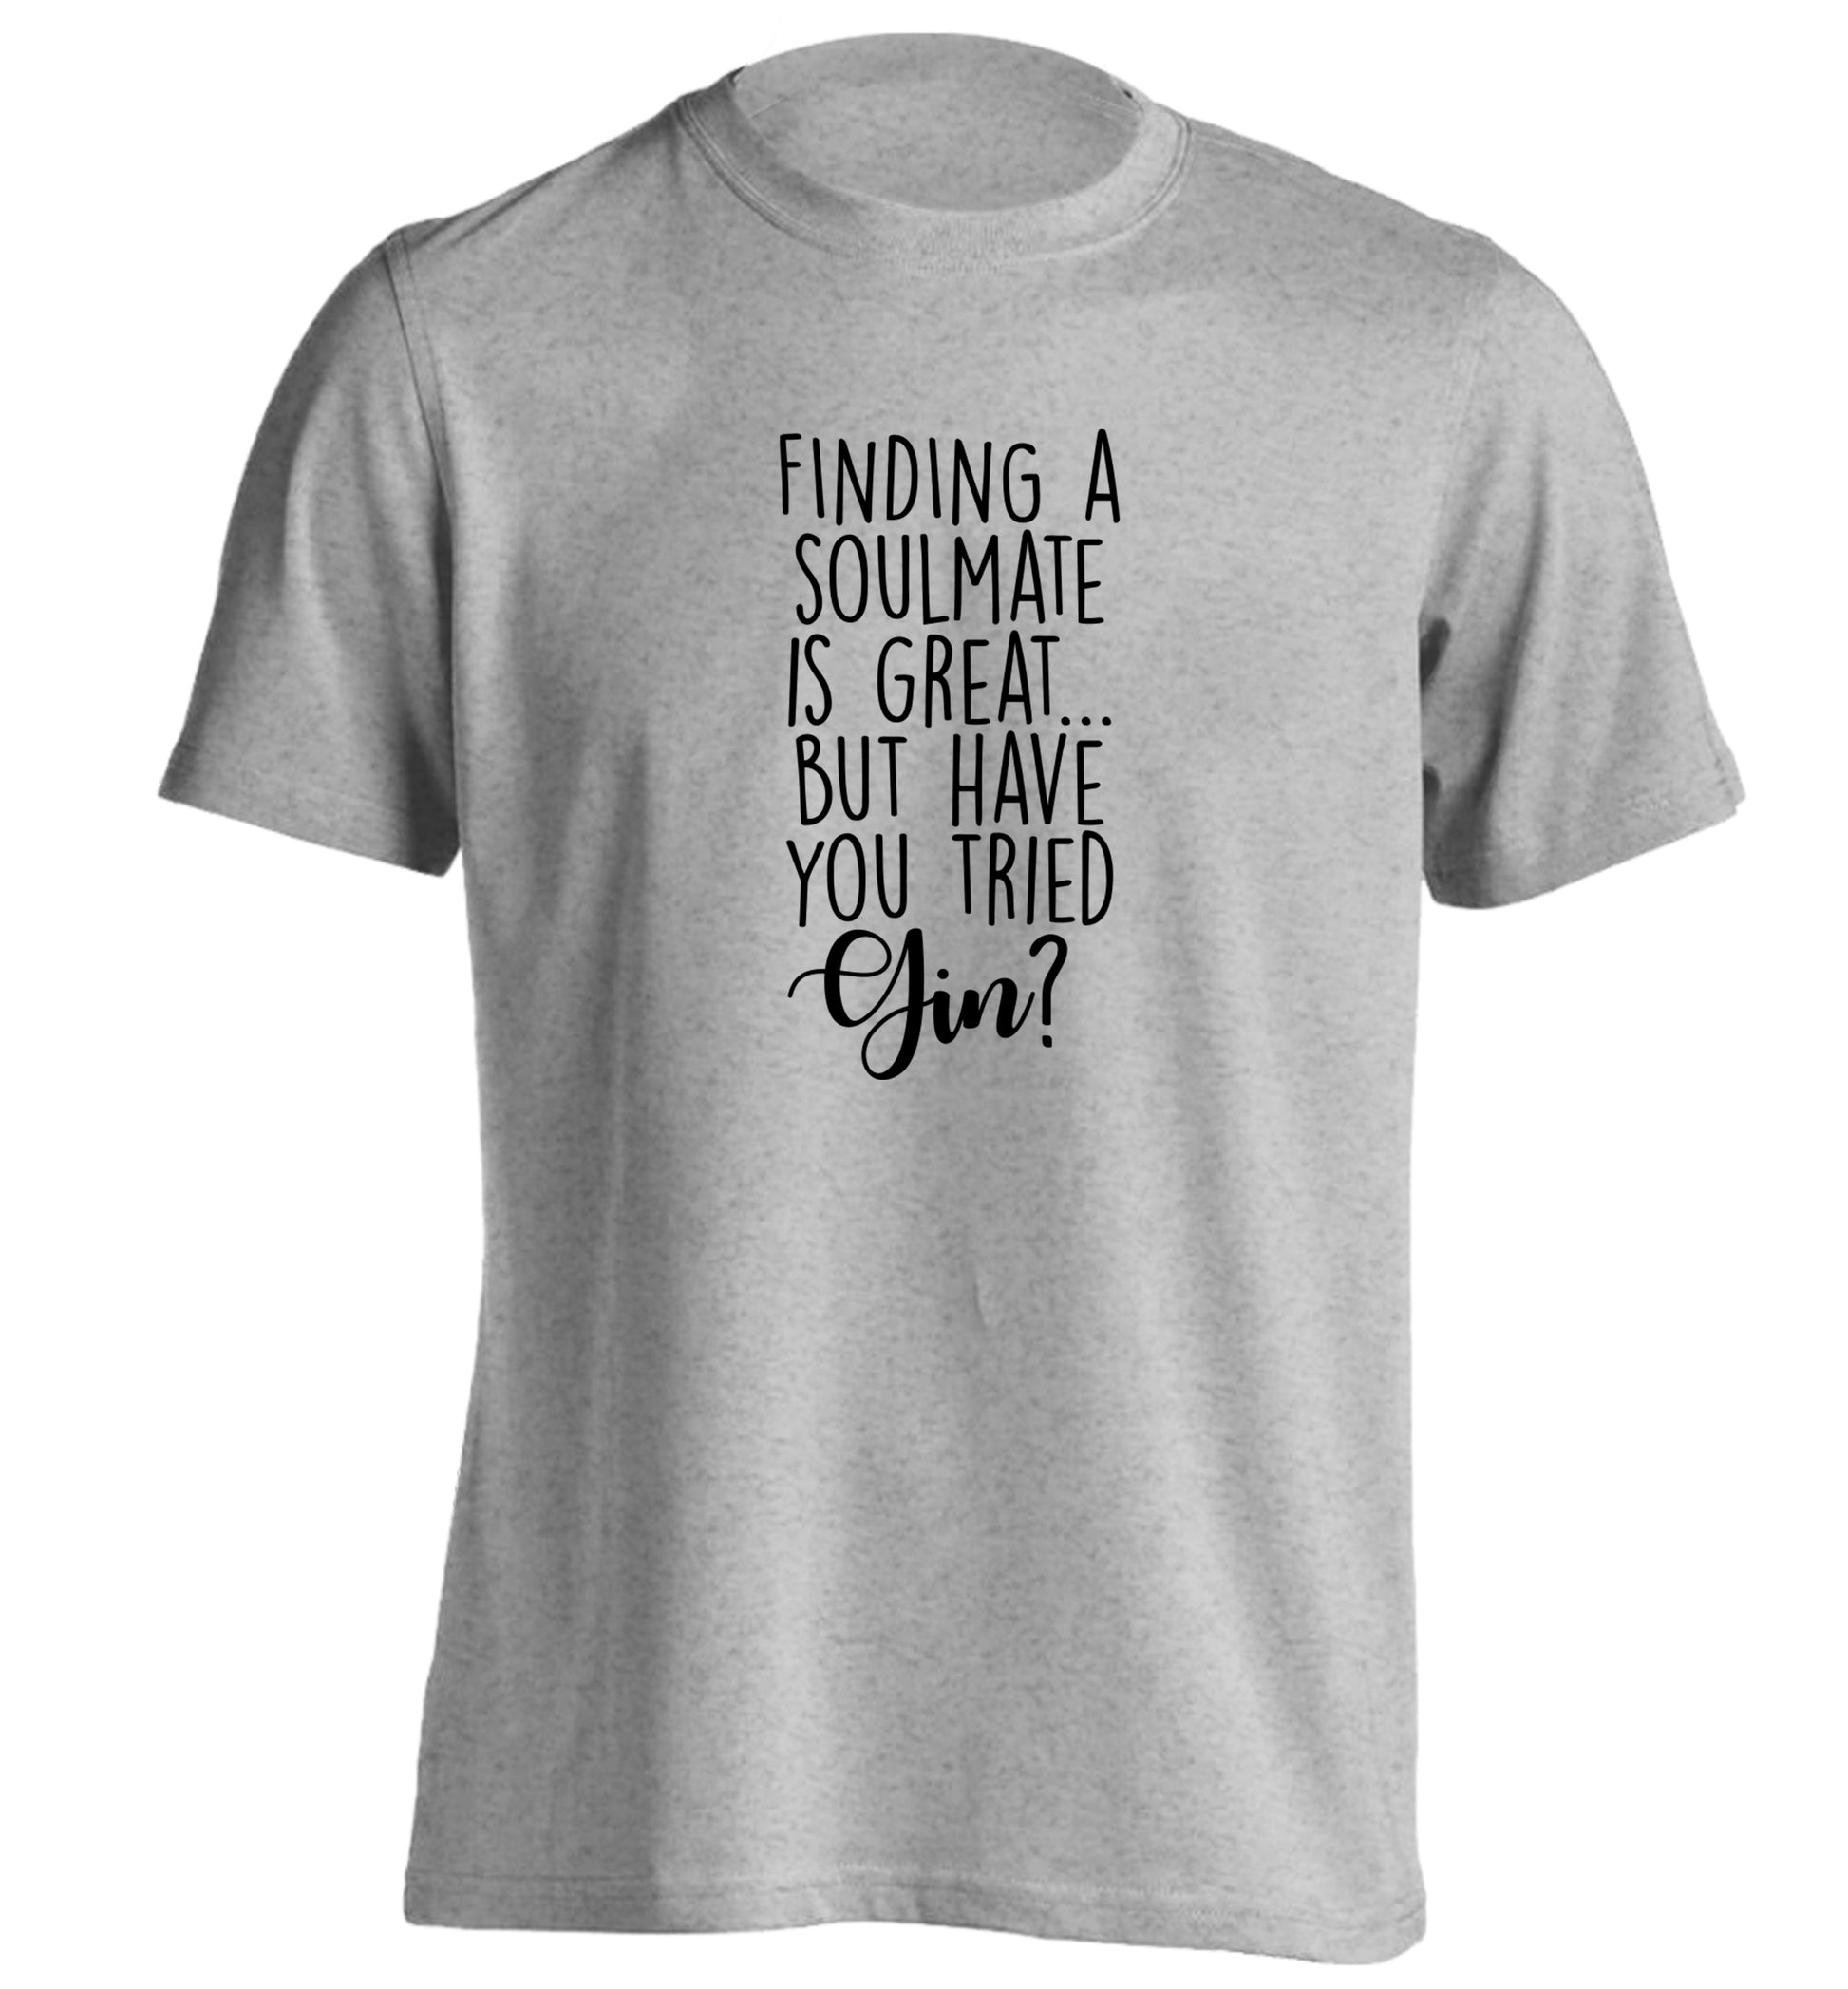 Finding a soulmate is great but have you tried gin? adults unisex grey Tshirt 2XL